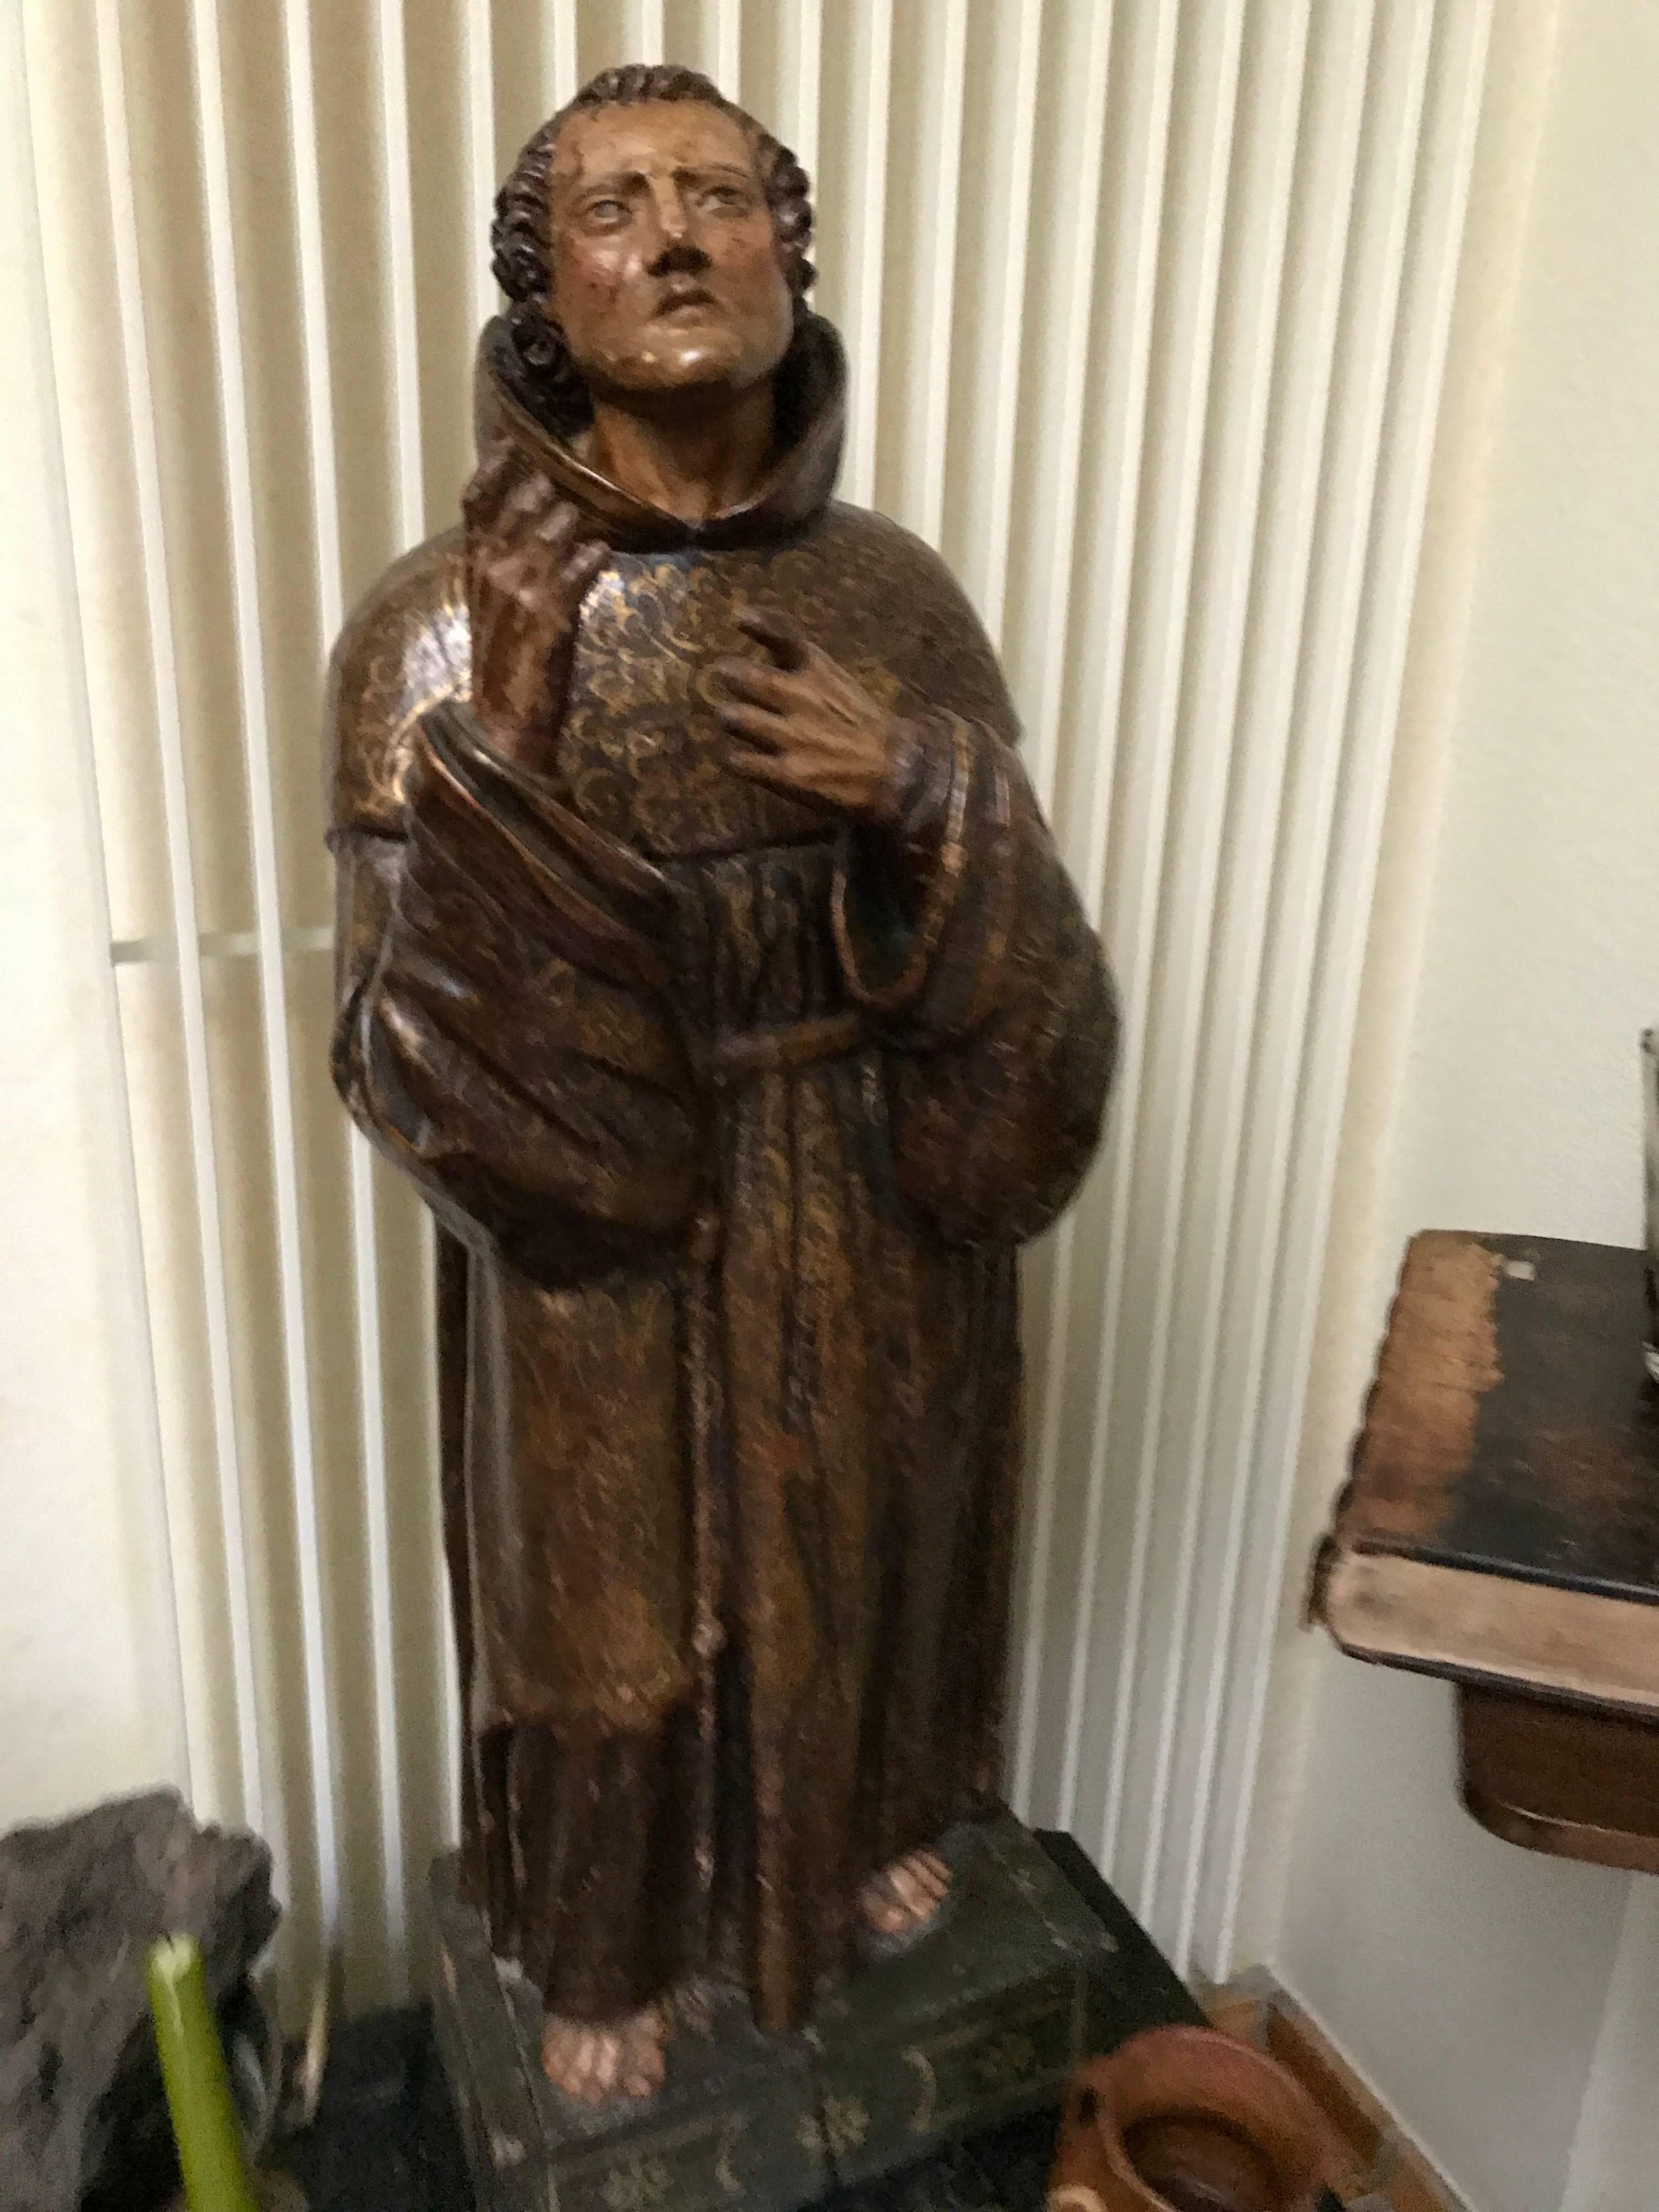 H Pascalis is a Spanish saint
statue carved in massive walnut and polychromed
17th century
Because off the walnut carved in one peace there is a crack or a vertical split
in the middle of the statue since centuries
That is the reason why in